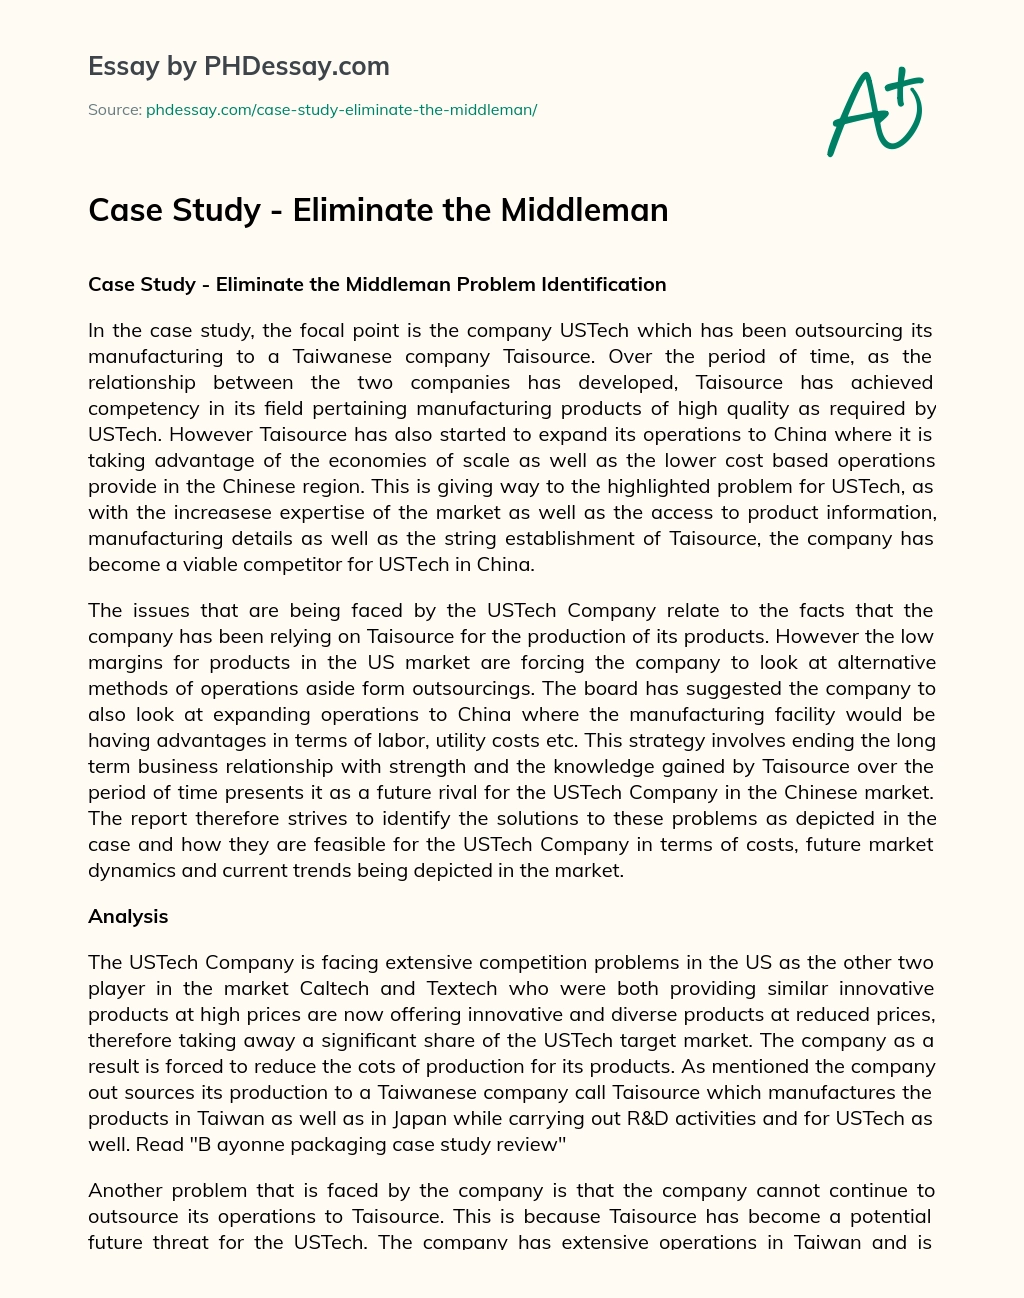 Case study – eliminate the middleman essay